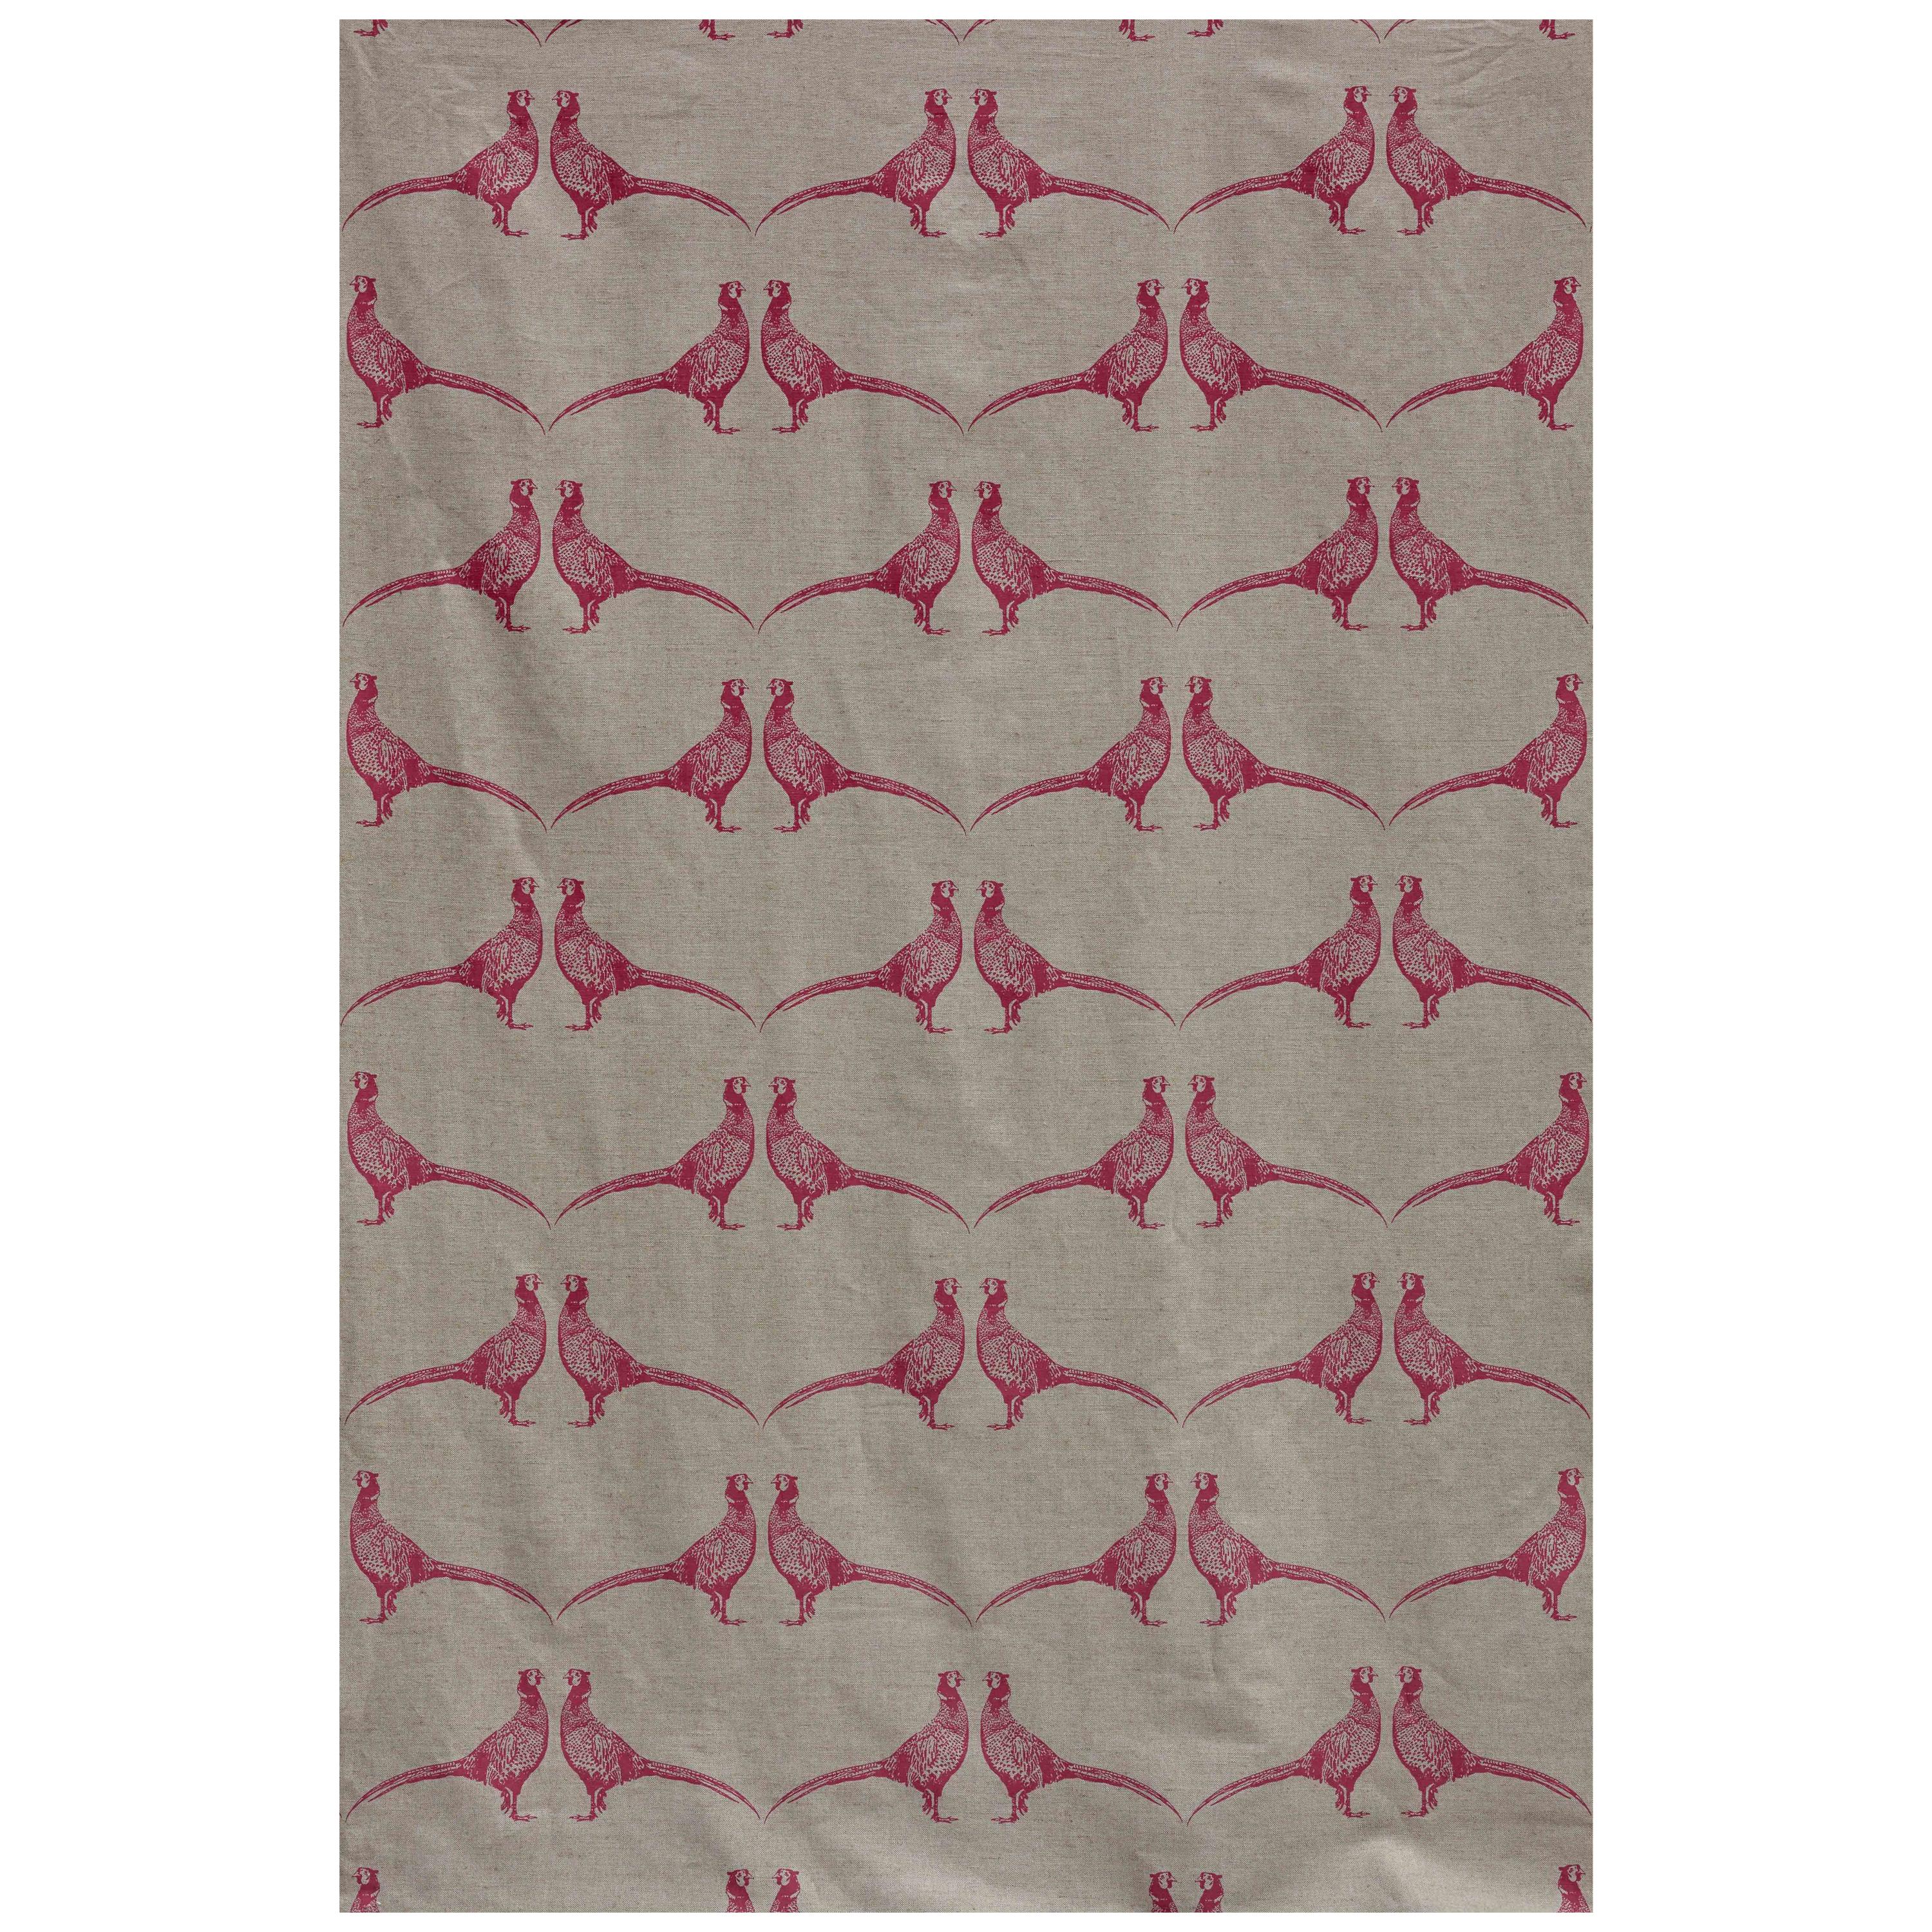 'Pheasant' Contemporary, Traditional Fabric in Pink on Natural im Angebot